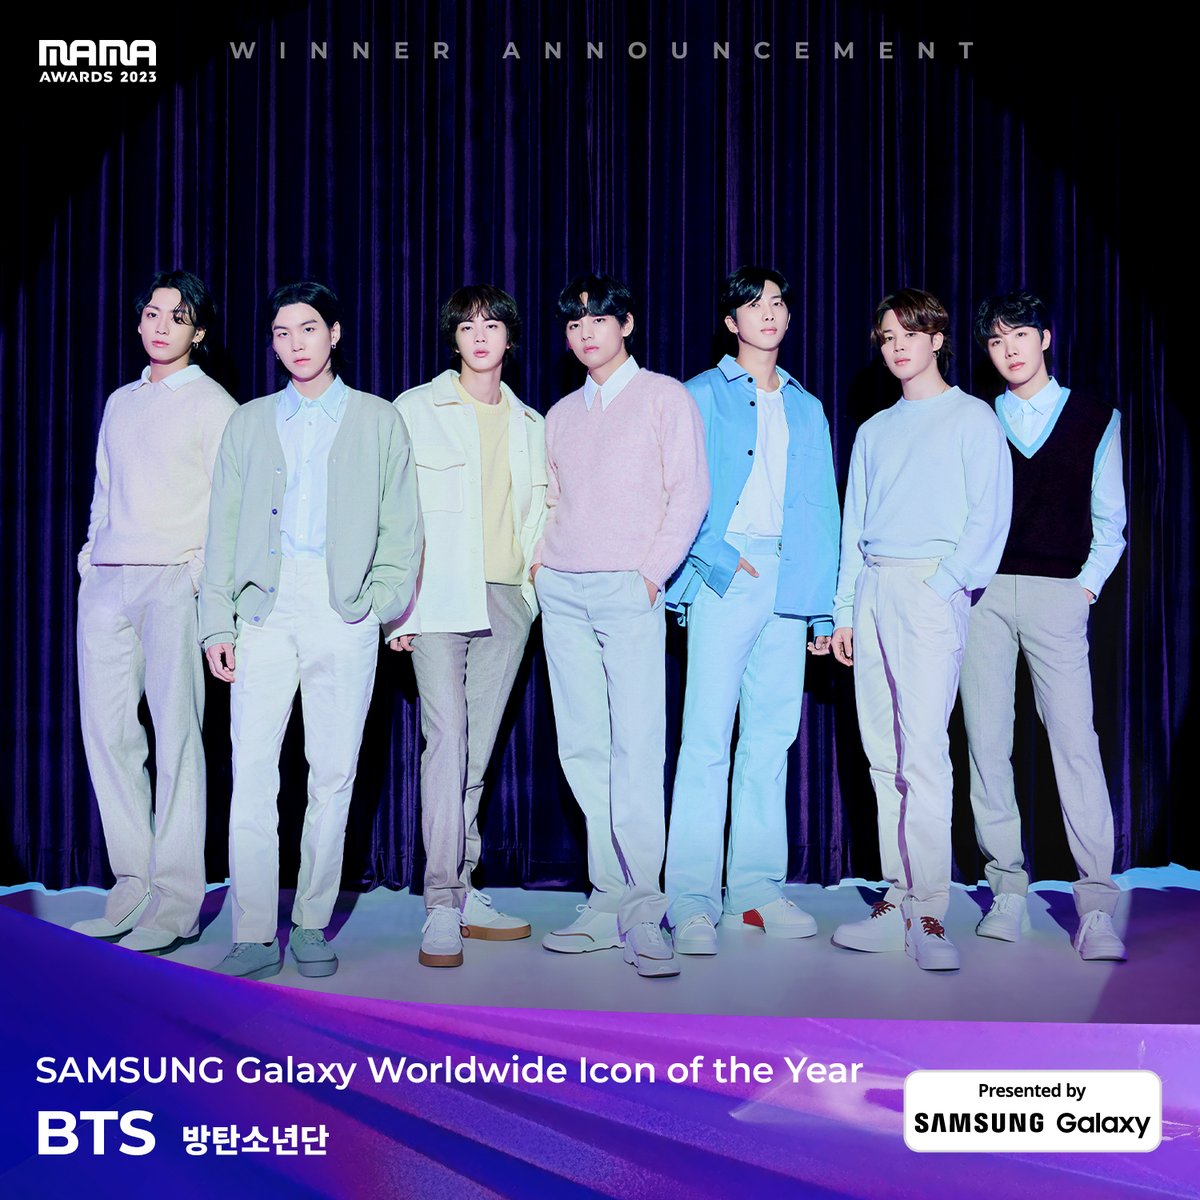 [#2023MAMA] SAMSUNG Galaxy Worldwide Icon of the Year #bts #방탄소년단 @bts_bighit We proudly announce the great winner of the 2023 MAMA AWARDS!🏆 ONE I BORN 2023 MAMA AWARDS #MAMAAWARDS #2023MAMAAWARDS